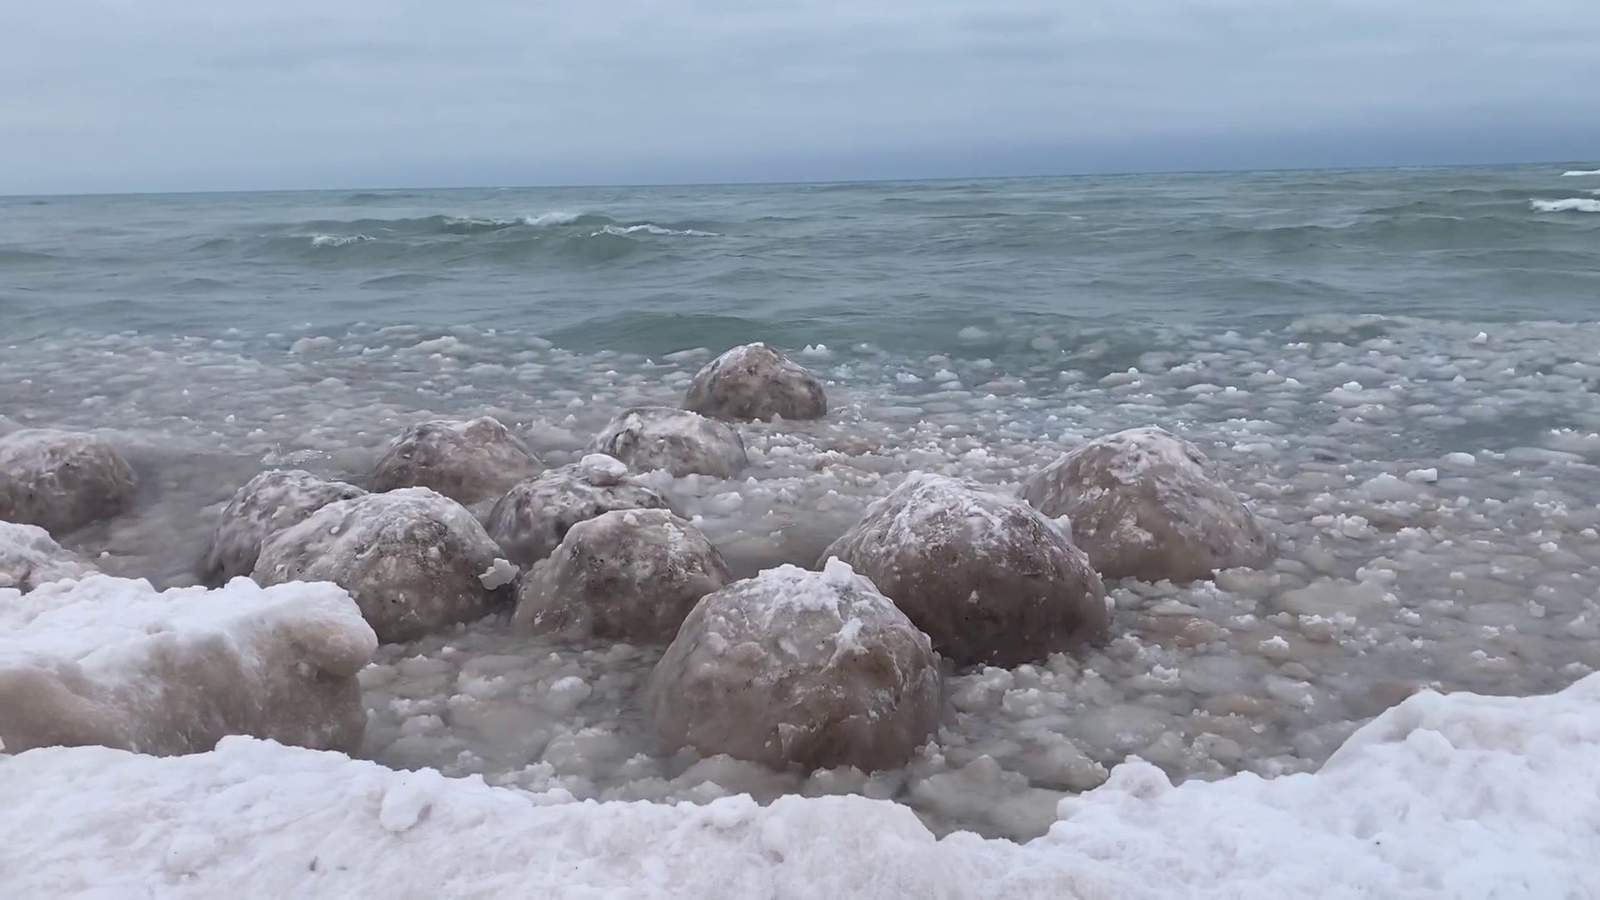 Video shows incredible spheres of ice forming on Lake Michigan